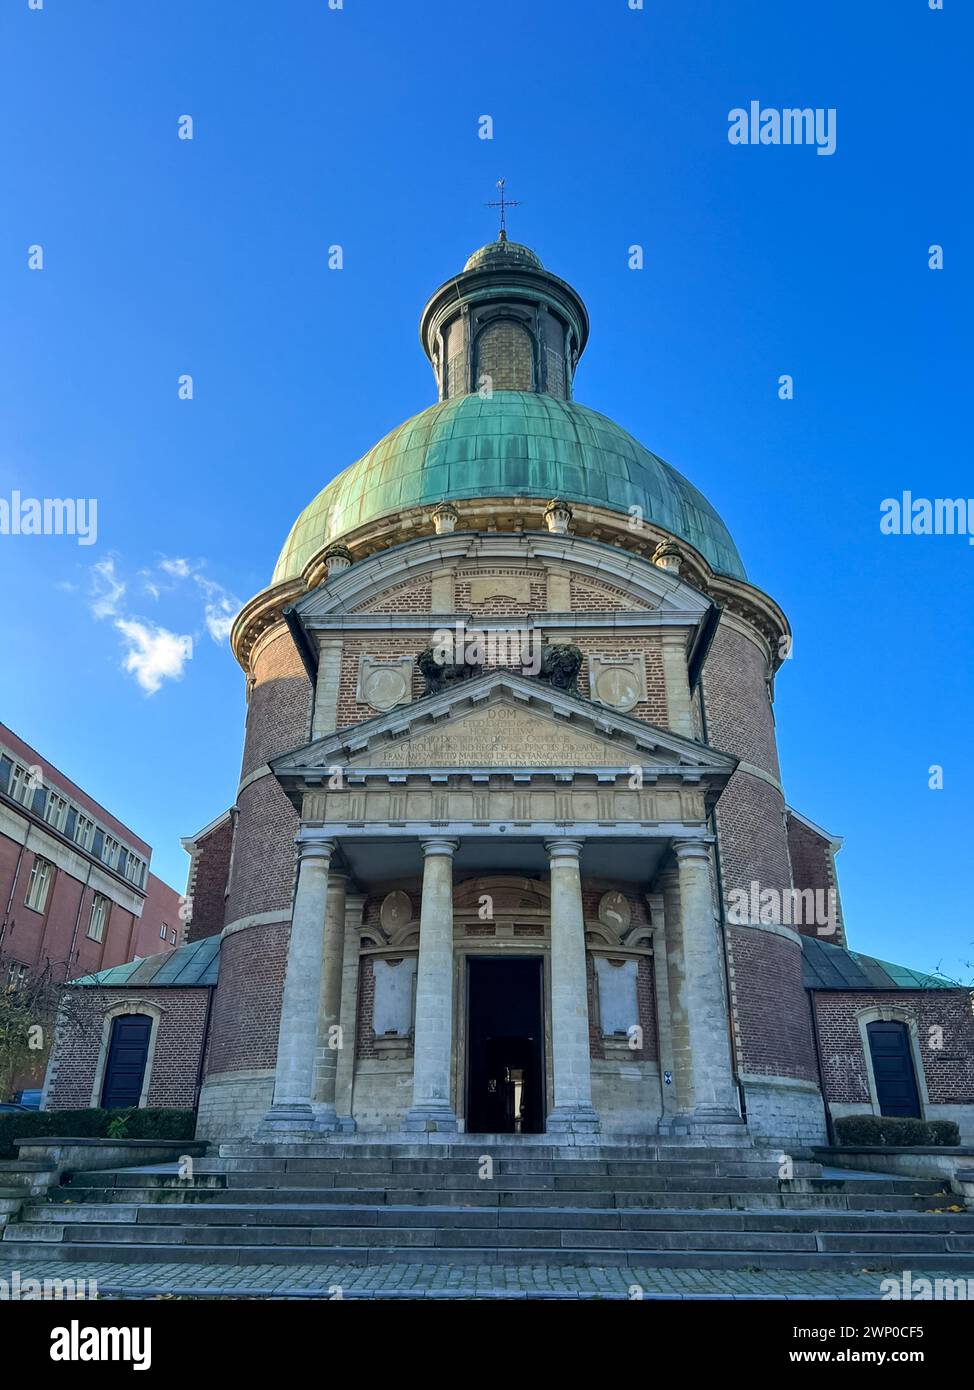 Neoclassical Church with Green Roof, Grand Dome and Ornate Classical Facade Stock Photo